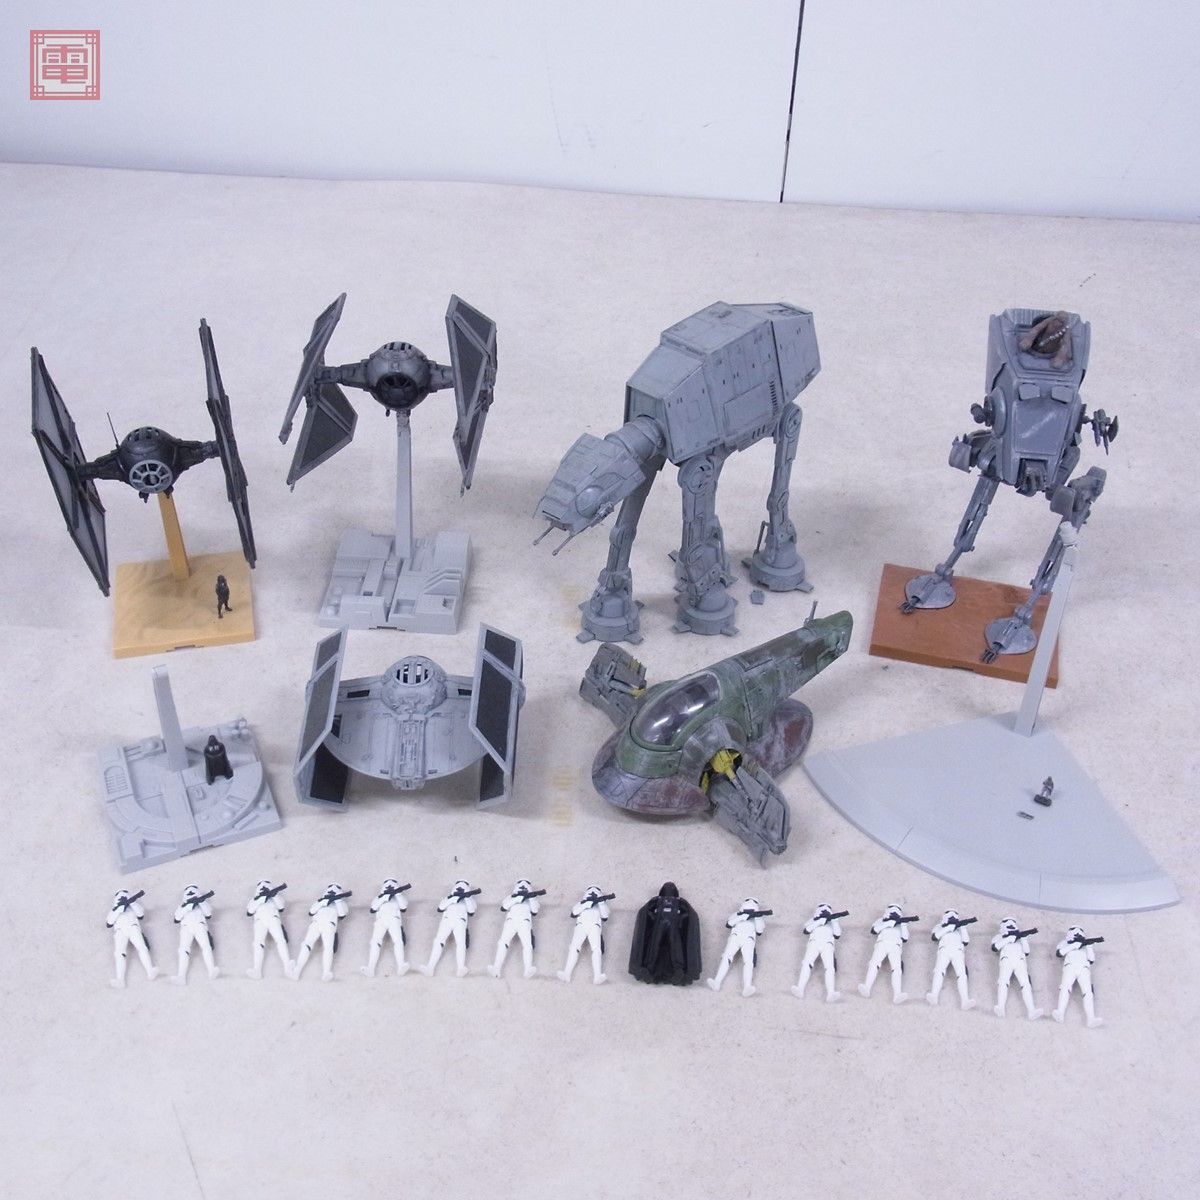  made goods Bandai 1/144 etc. Star Wars attrition -vuI/AT-AT/AT-ST/ Thai * Fighter other together set damage have present condition goods BANDAI STAR WARS[20